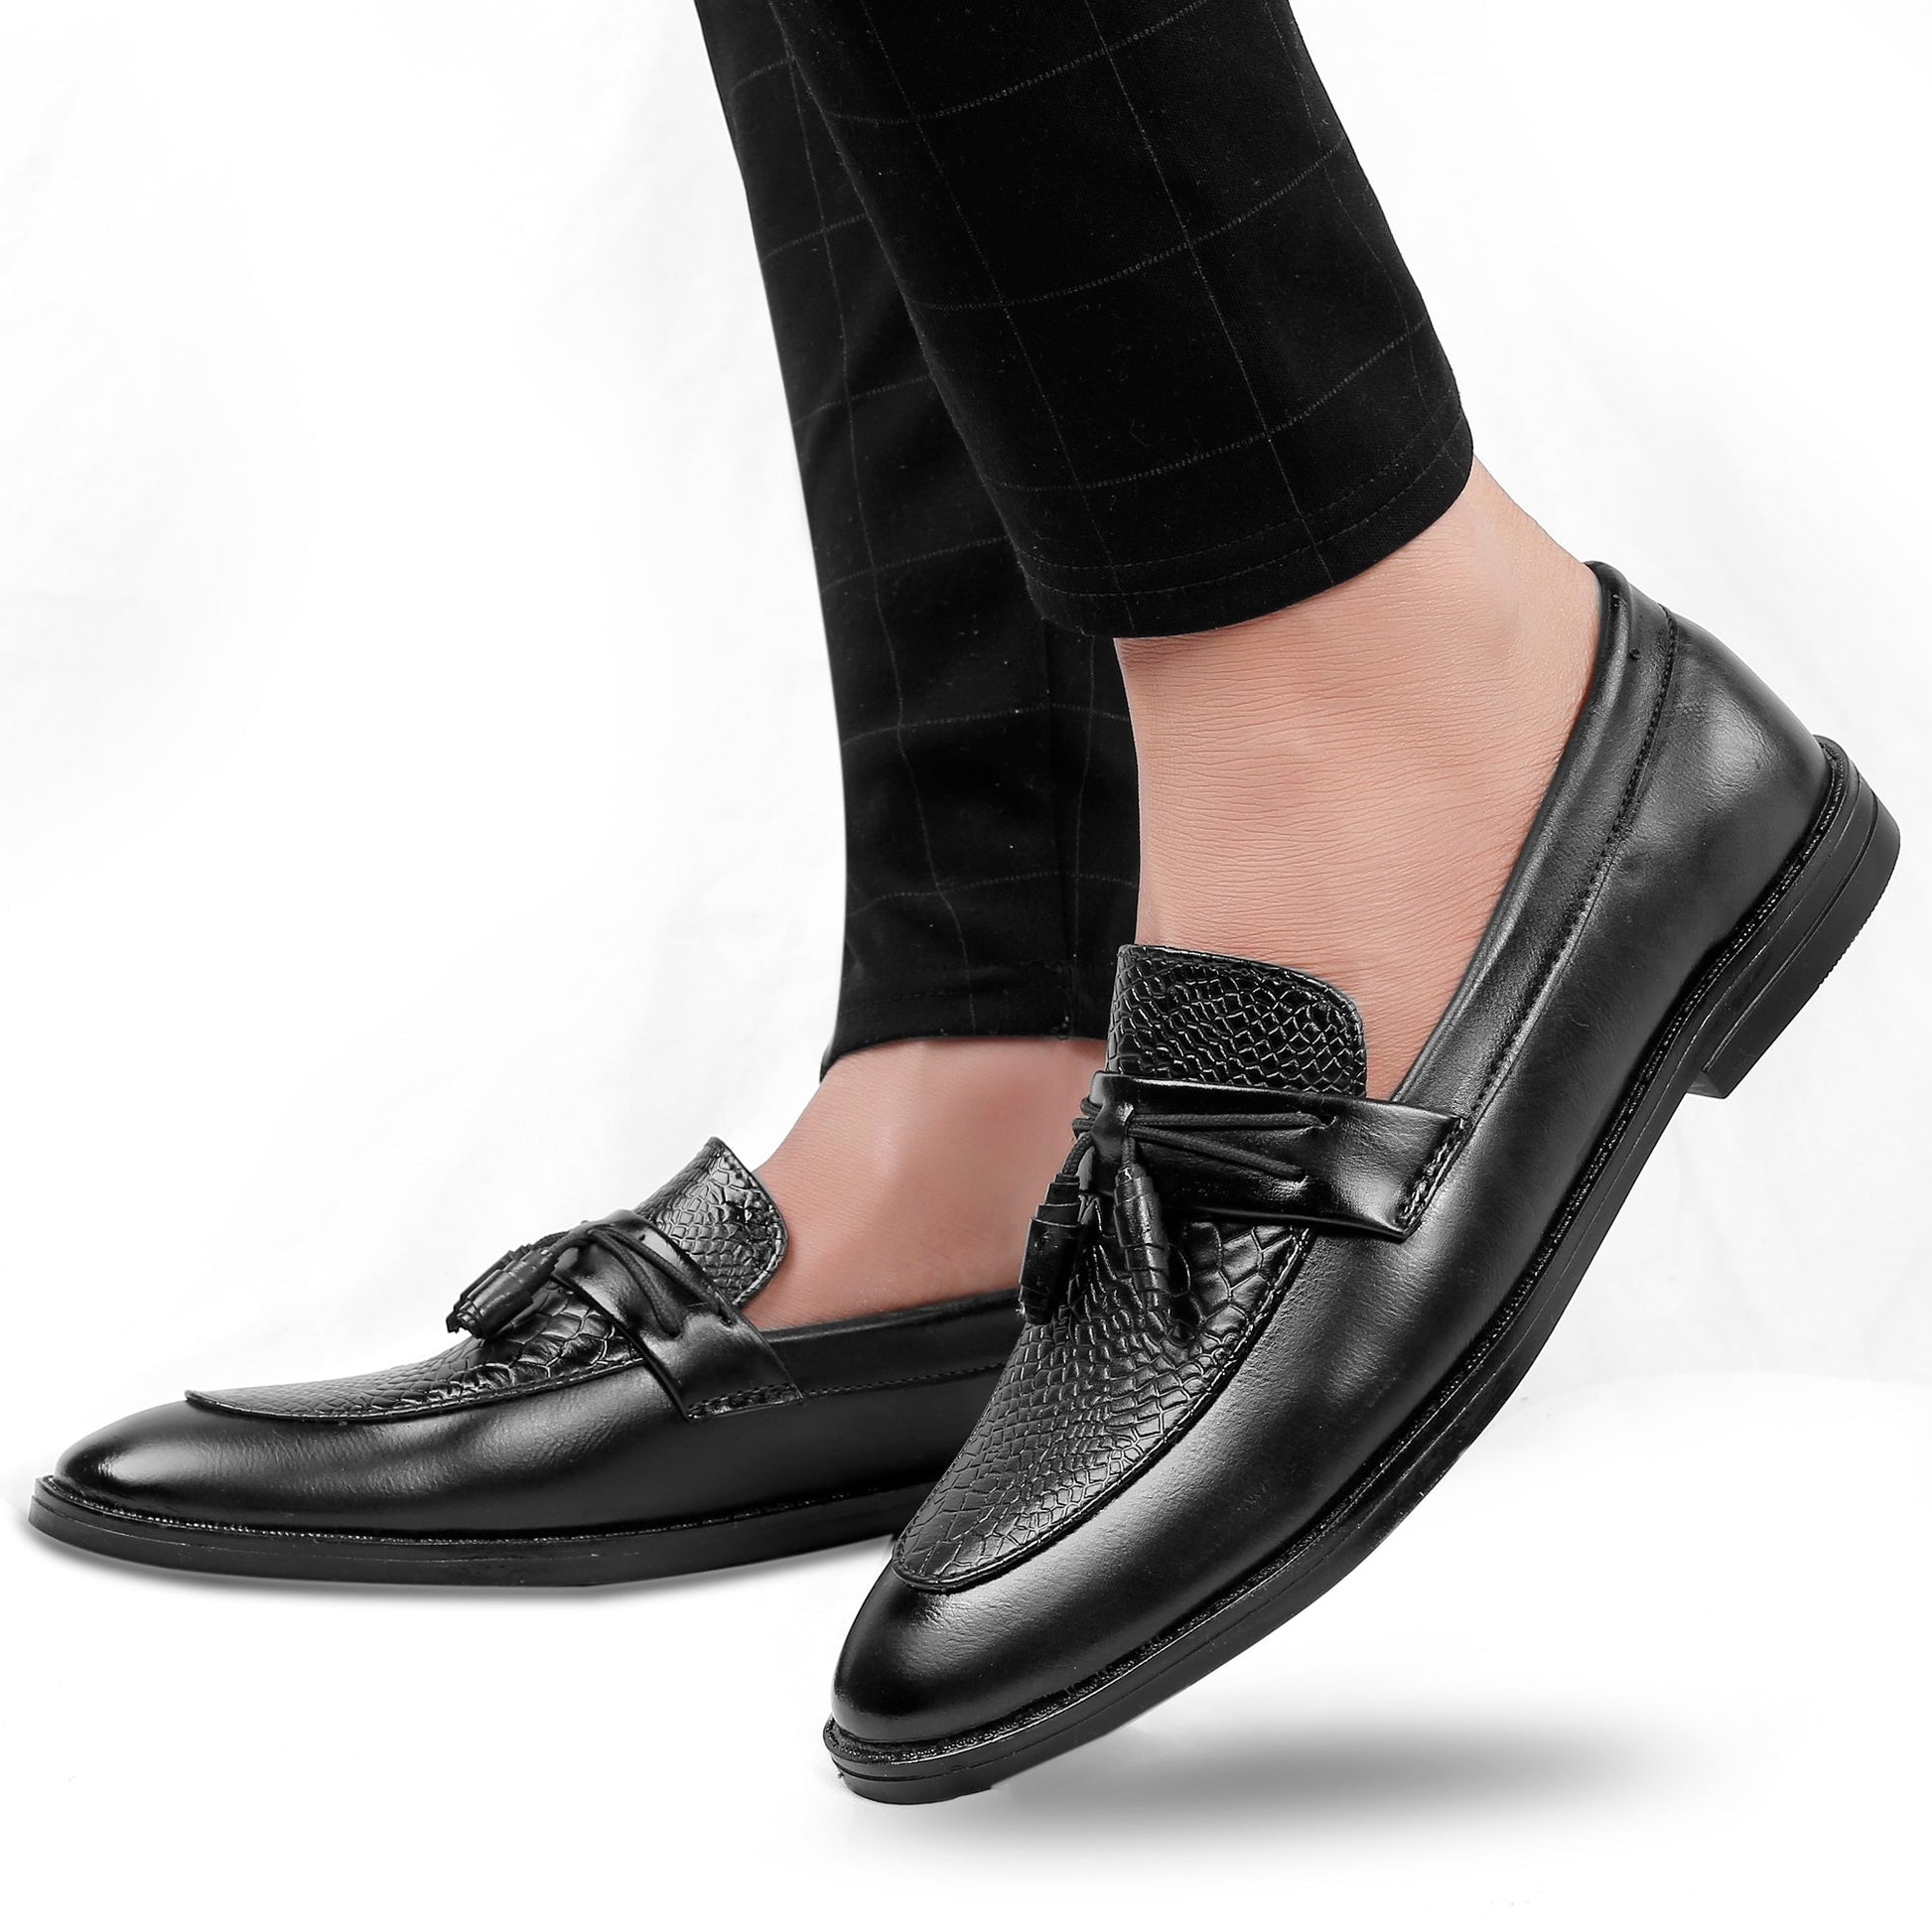 Luxury Design Fashion Moccasin Shoes For Men Party And Casual Wear -JackMarc - JACKMARC.COM